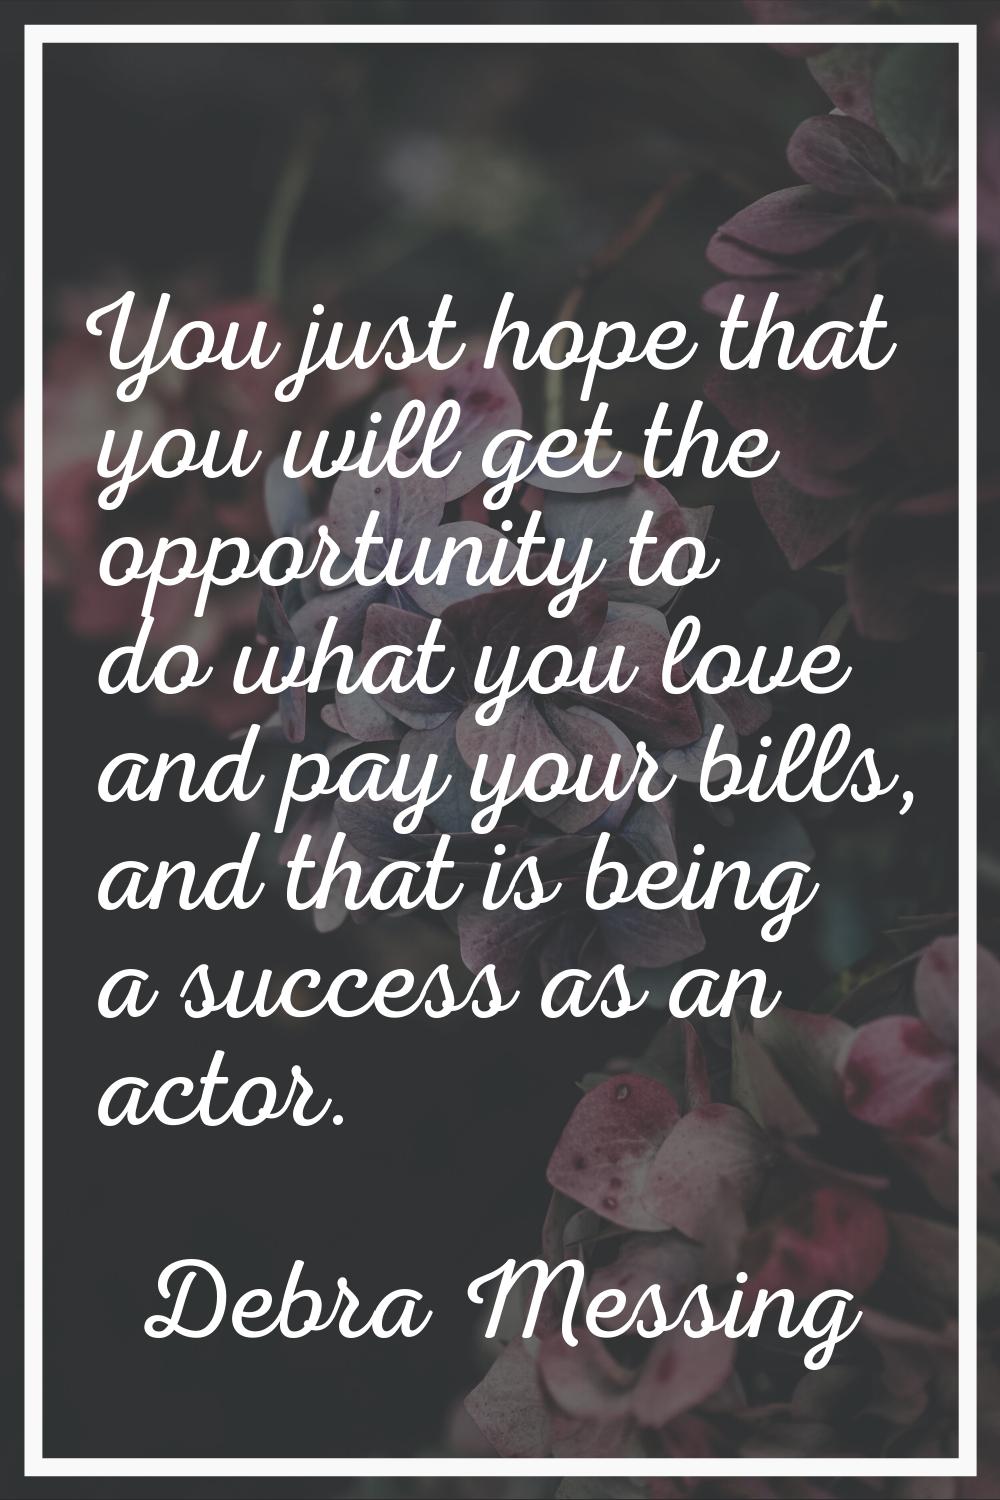 You just hope that you will get the opportunity to do what you love and pay your bills, and that is